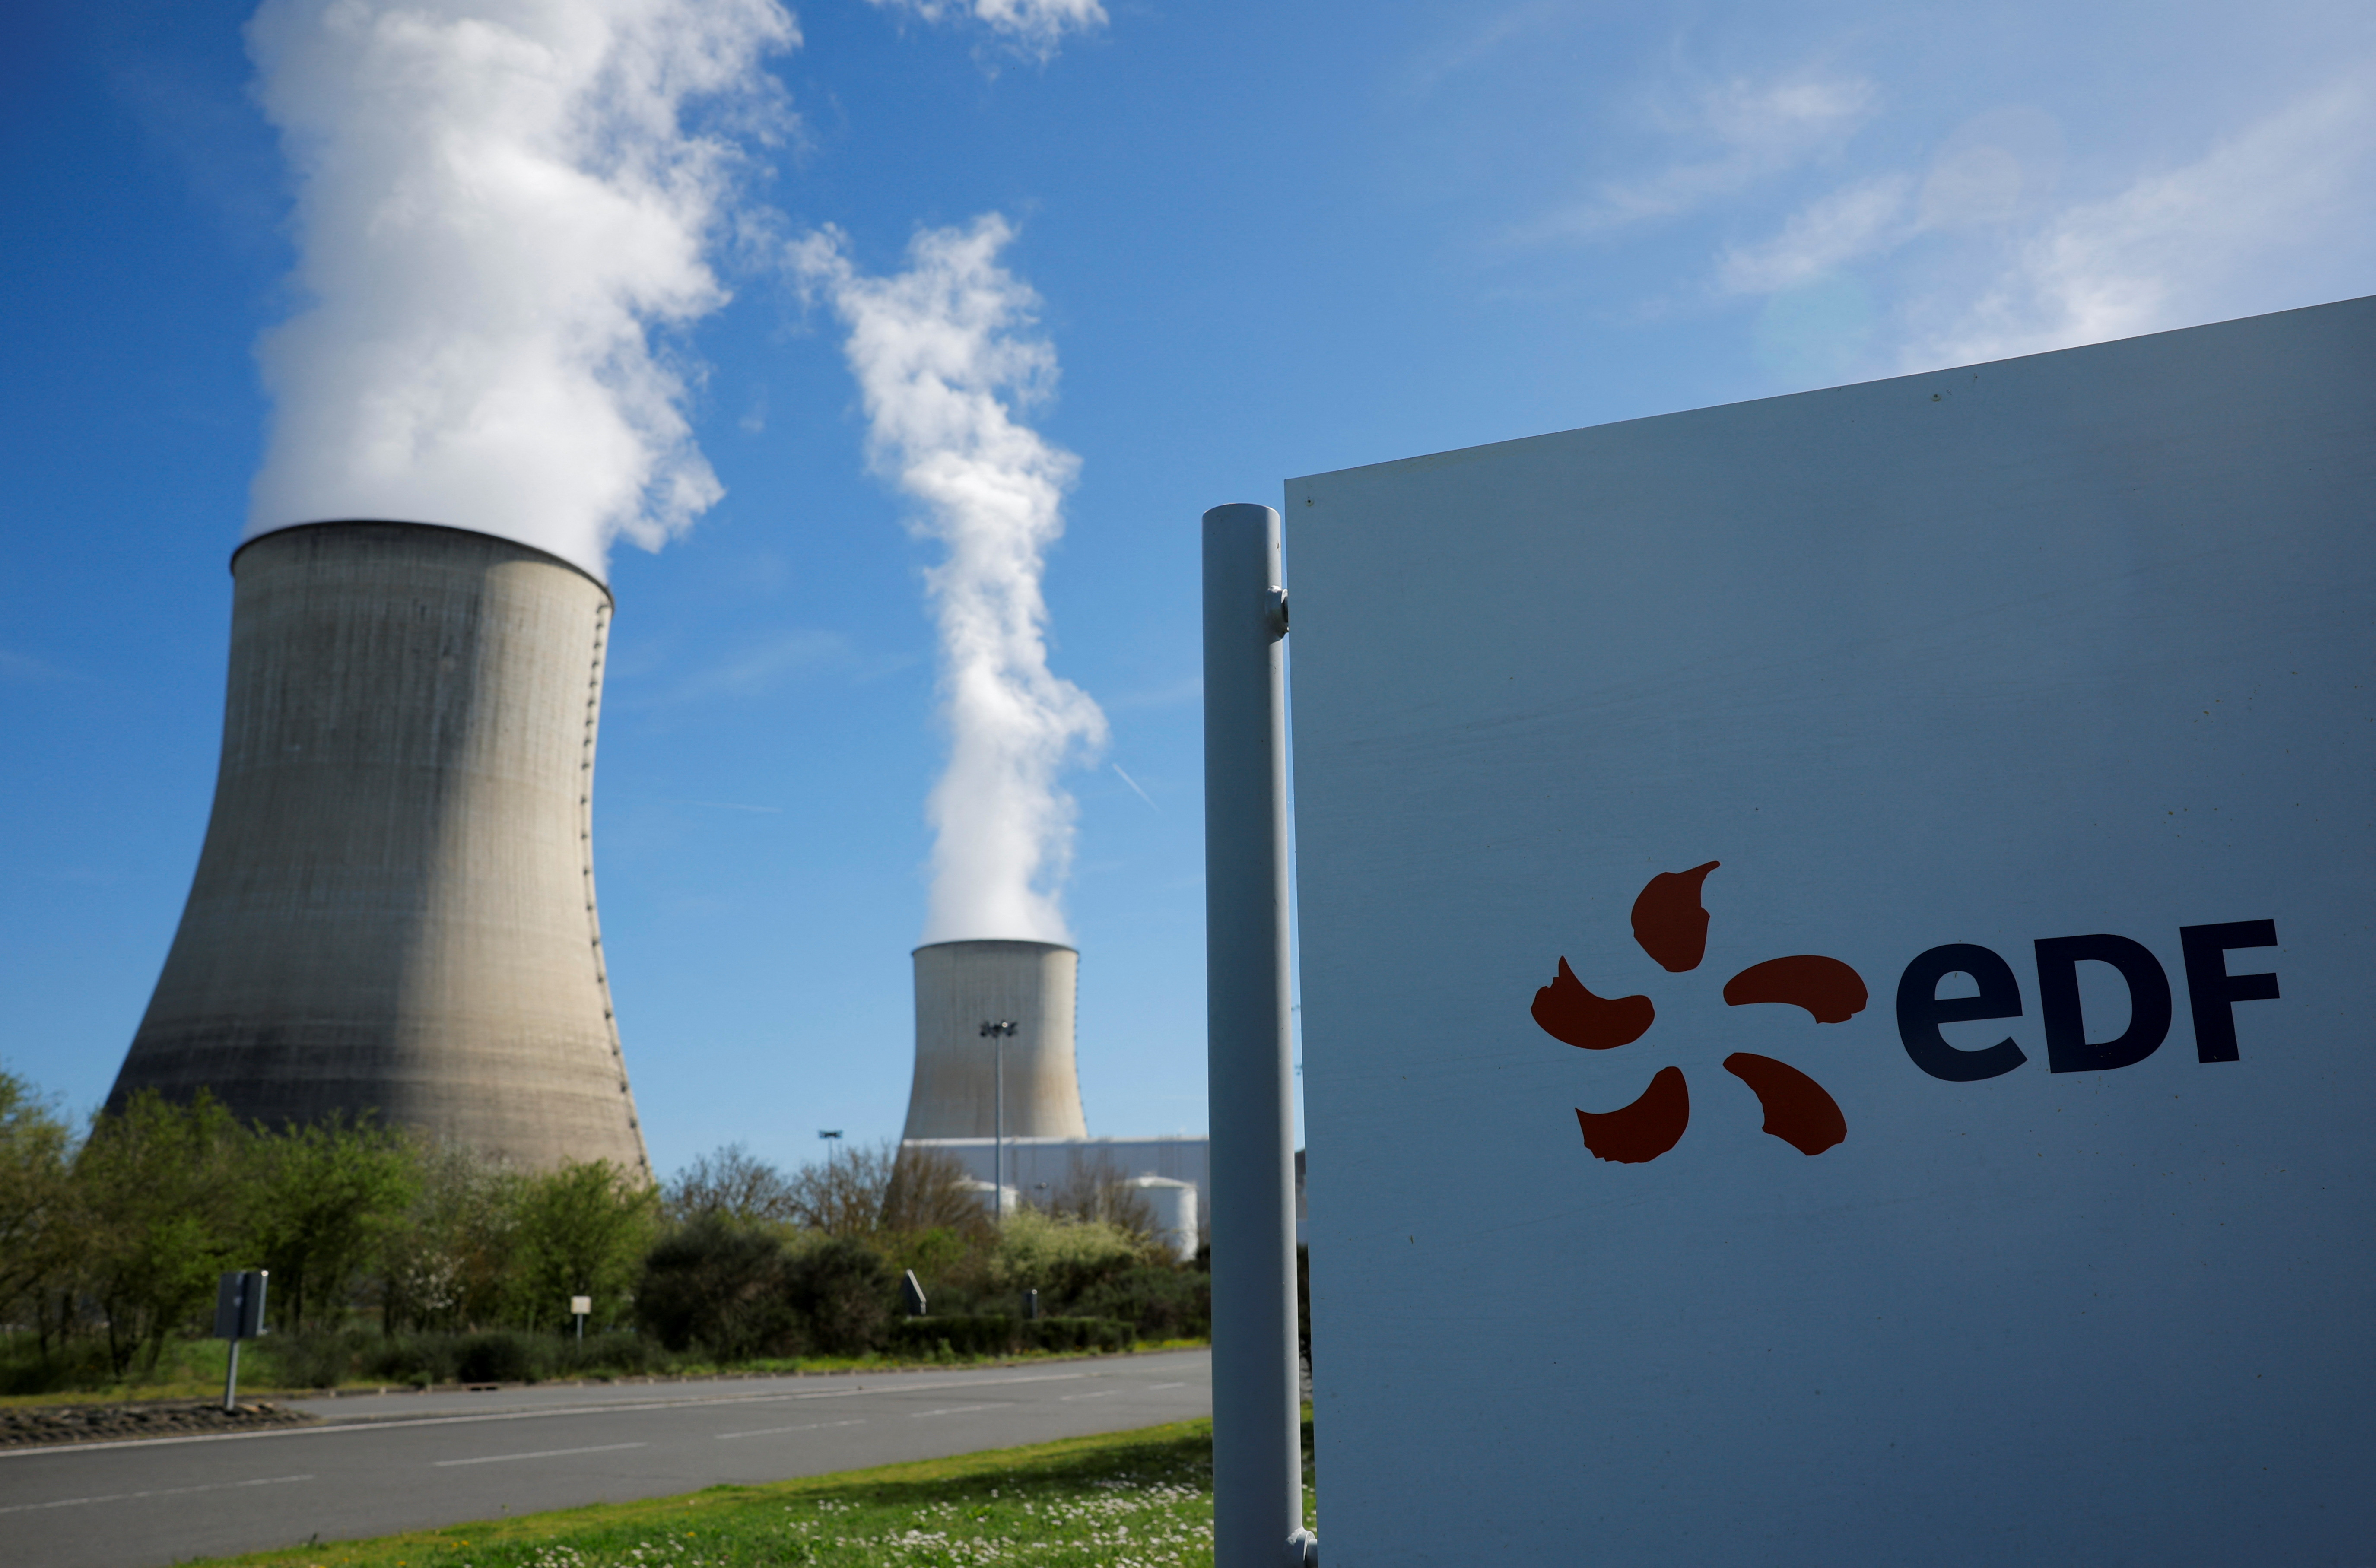 The logo of Electricite de France (EDF) is seen in front of cooling towers at the entrance of the nuclear power plant site